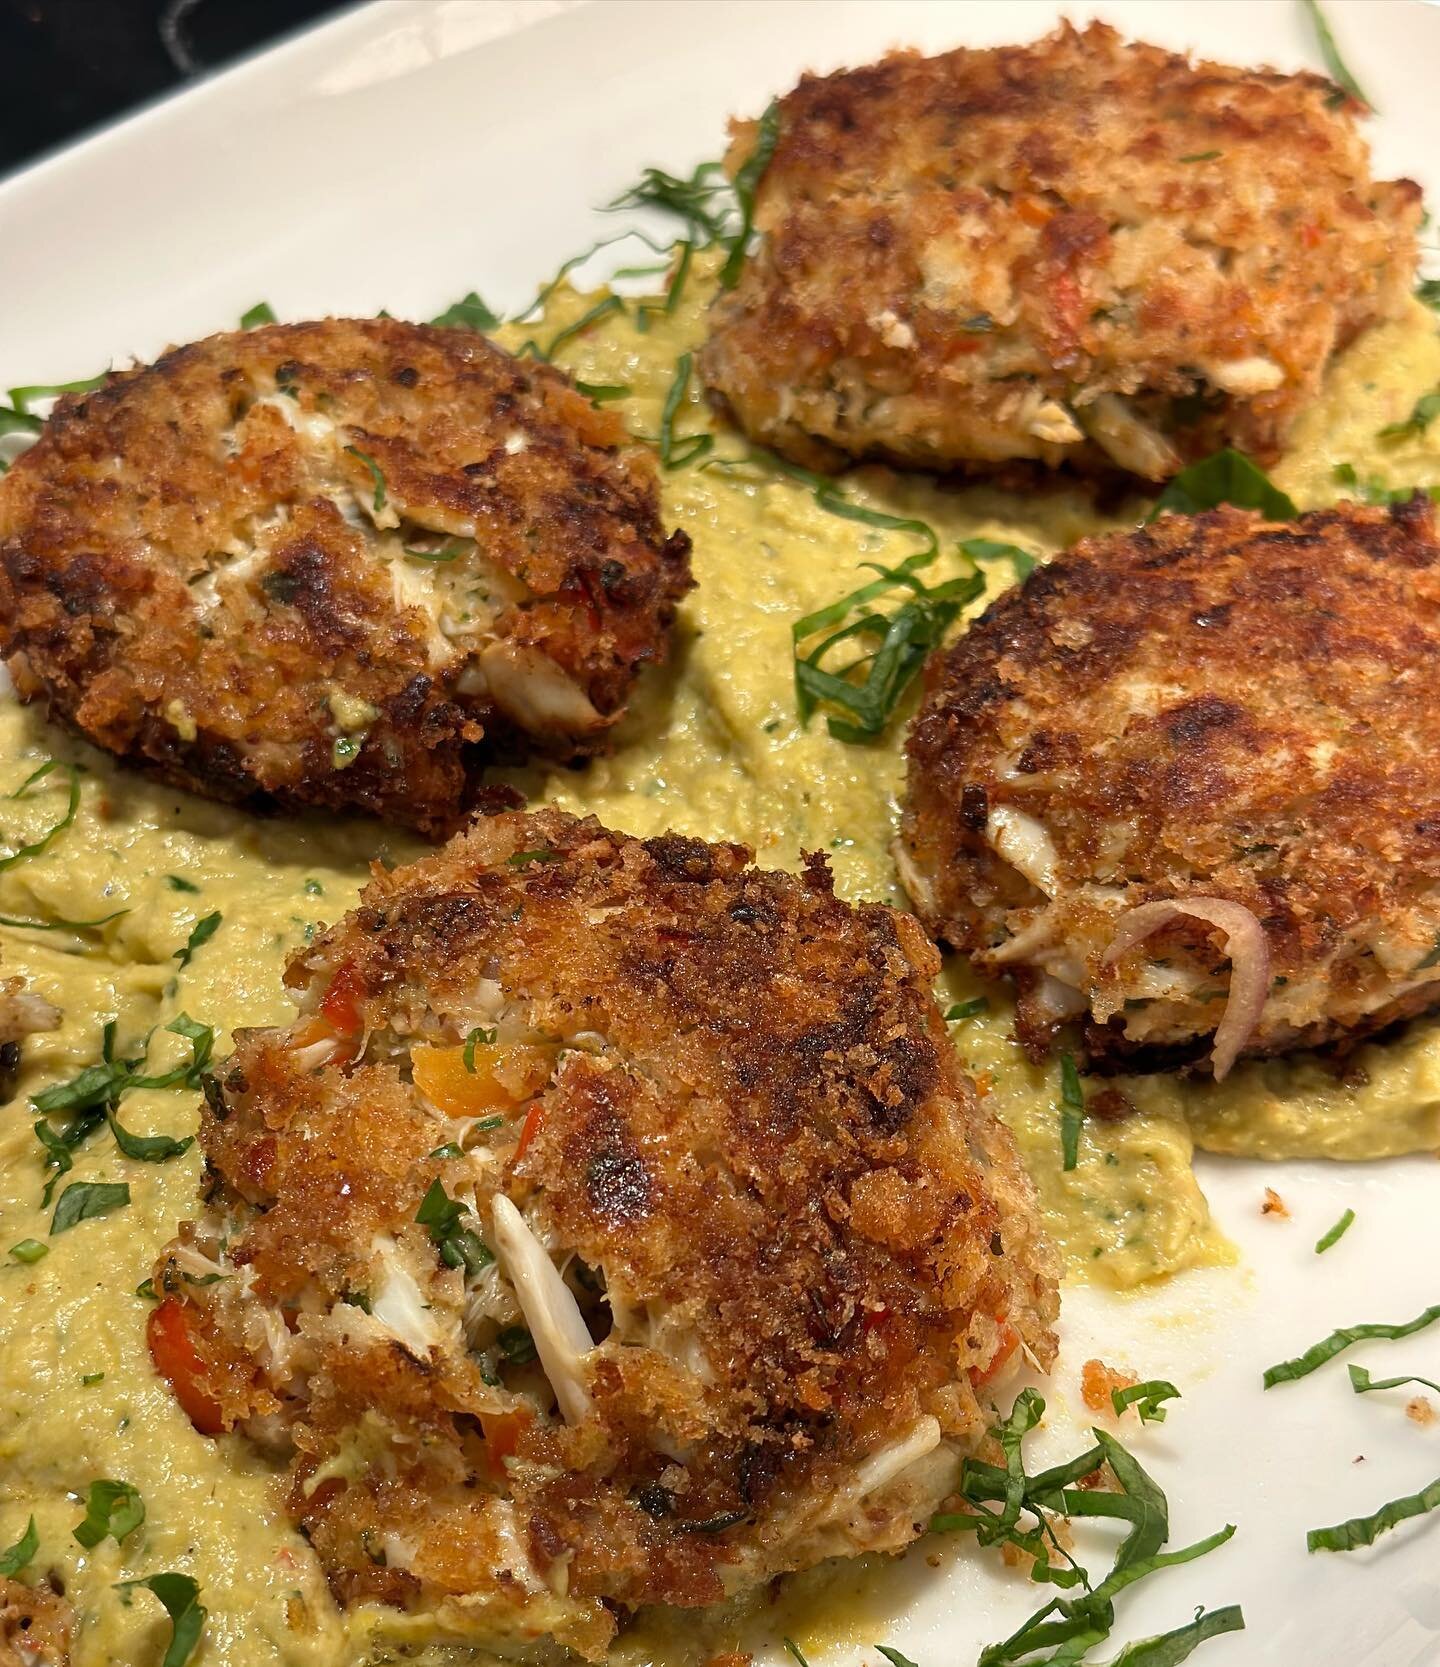 This is a great summer dinner choice for 2 or for your next dinner party!!! Jumbo lump crab cakes with a basil corn pur&eacute;e!! The sweetness of the corn combined with the crabmeat is a wonderful combination of flavors!! Place  your order at www.e